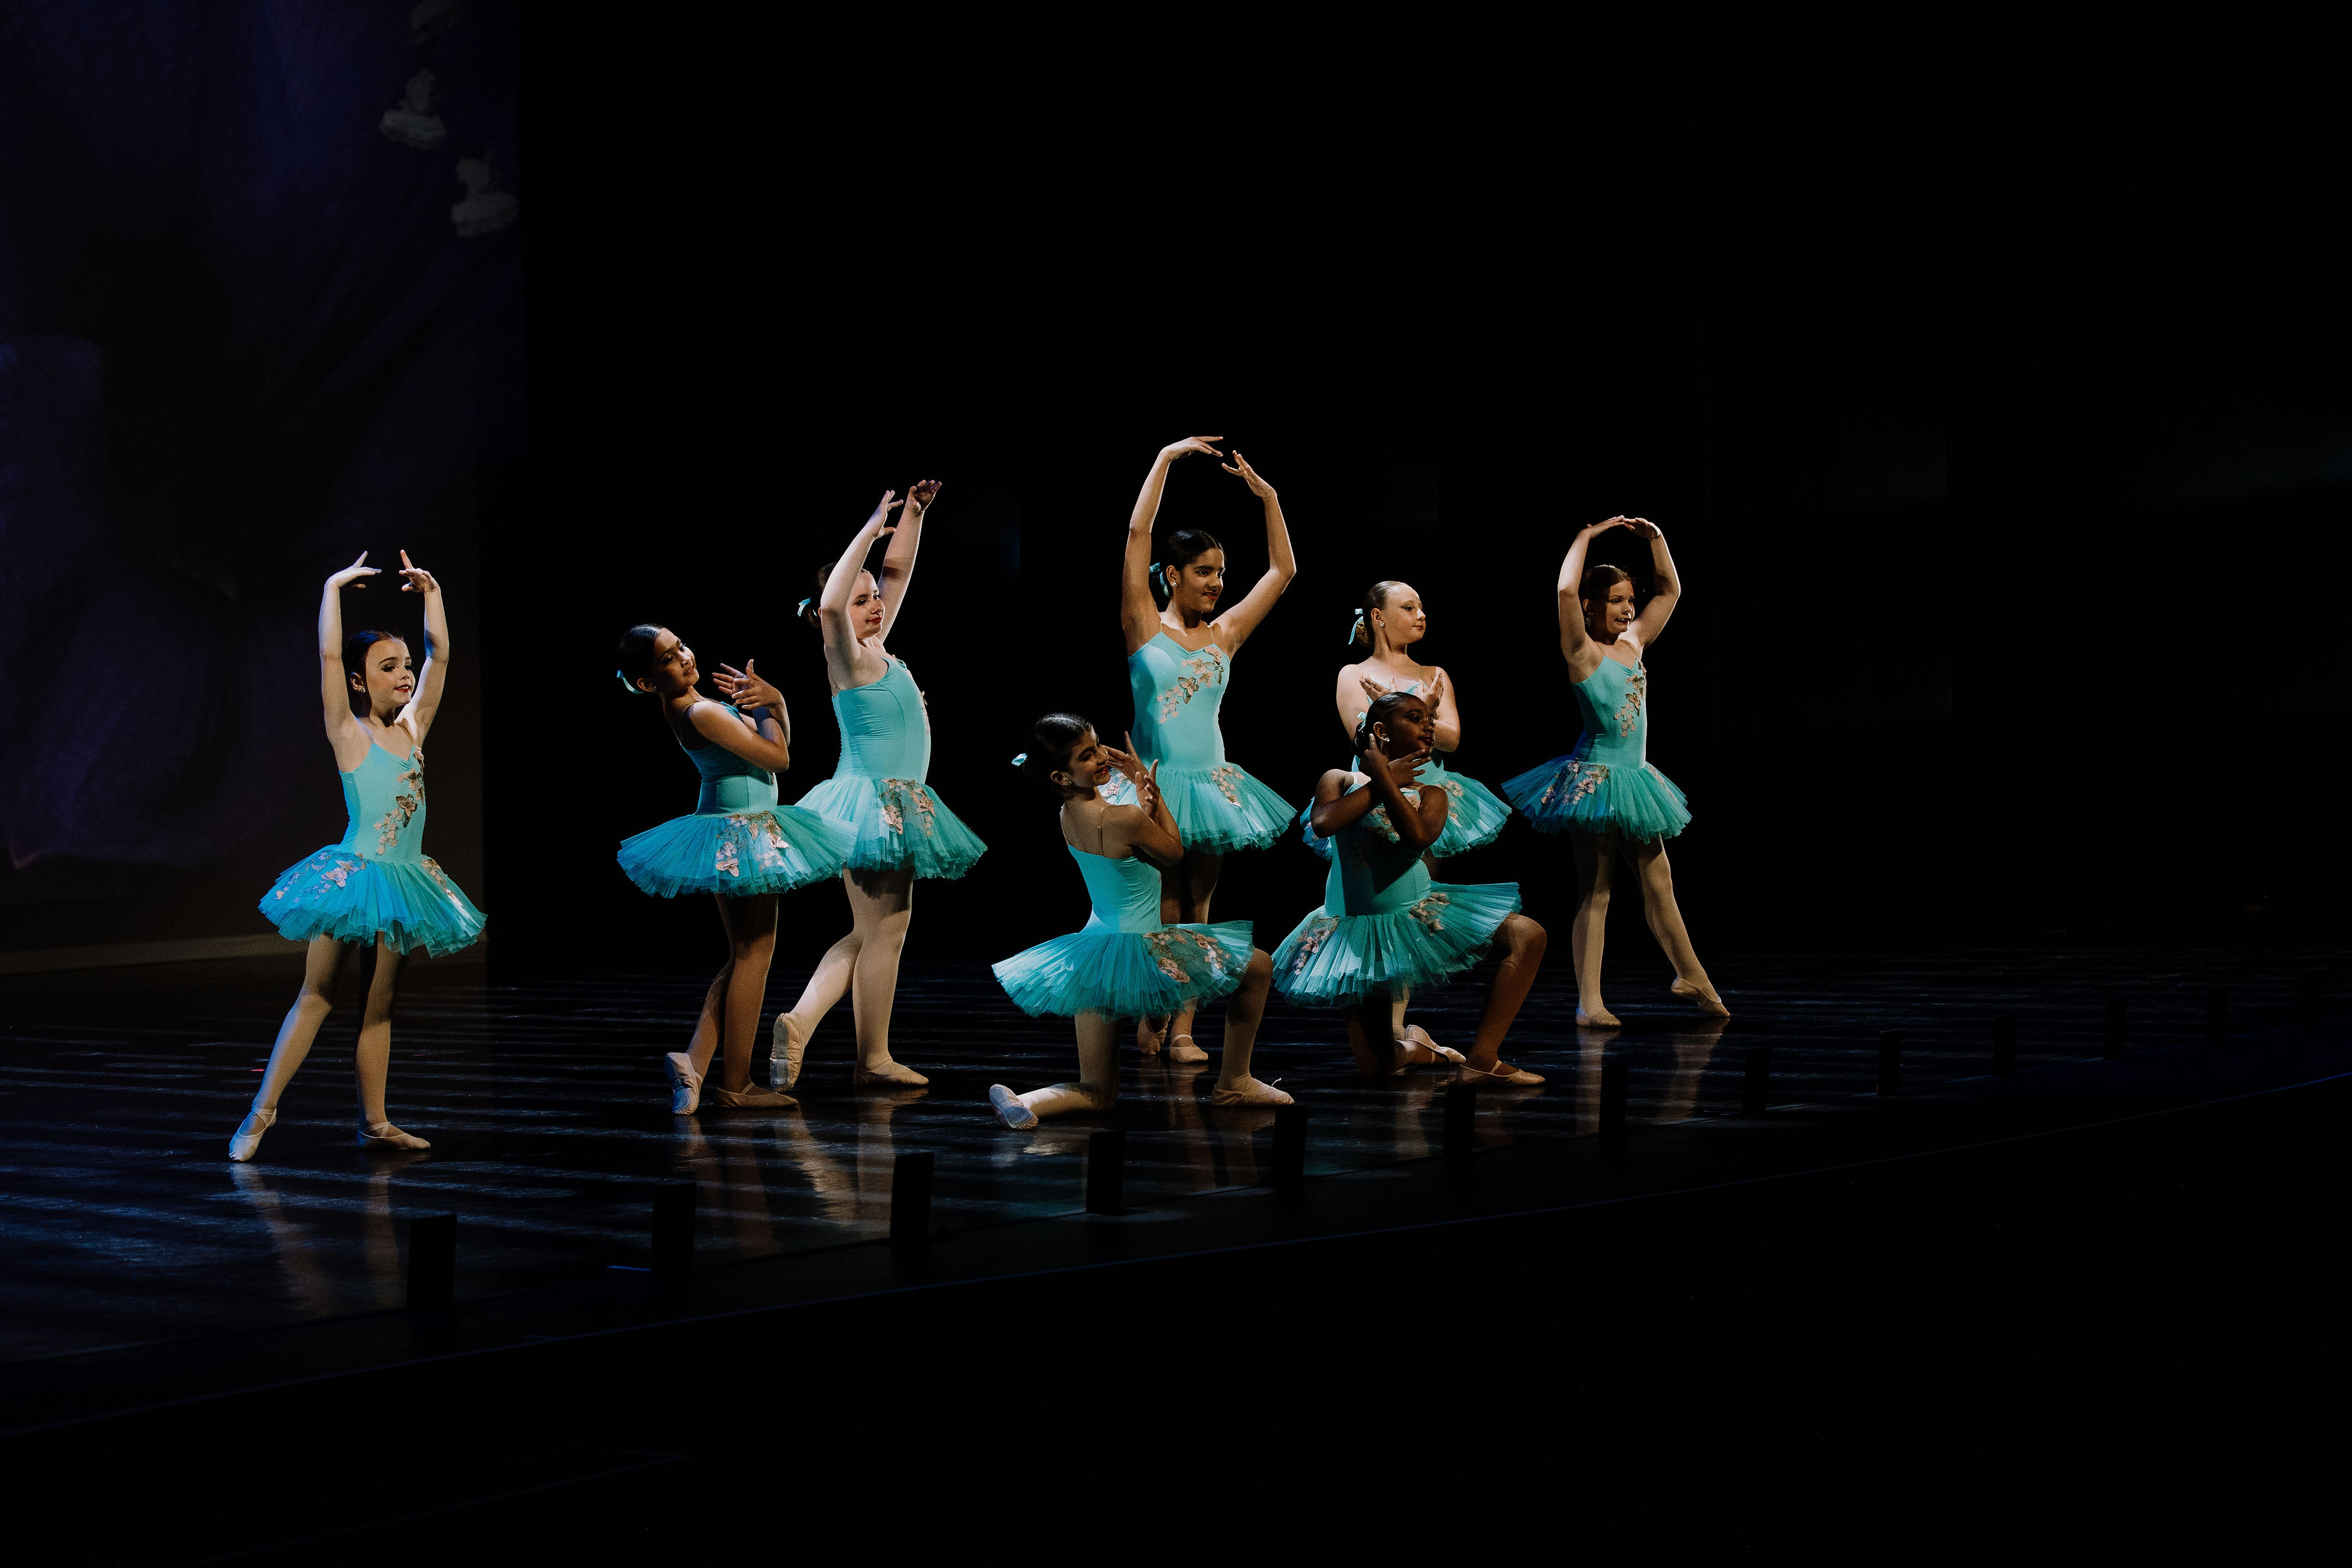 Ending pose from a ballet performance on stage